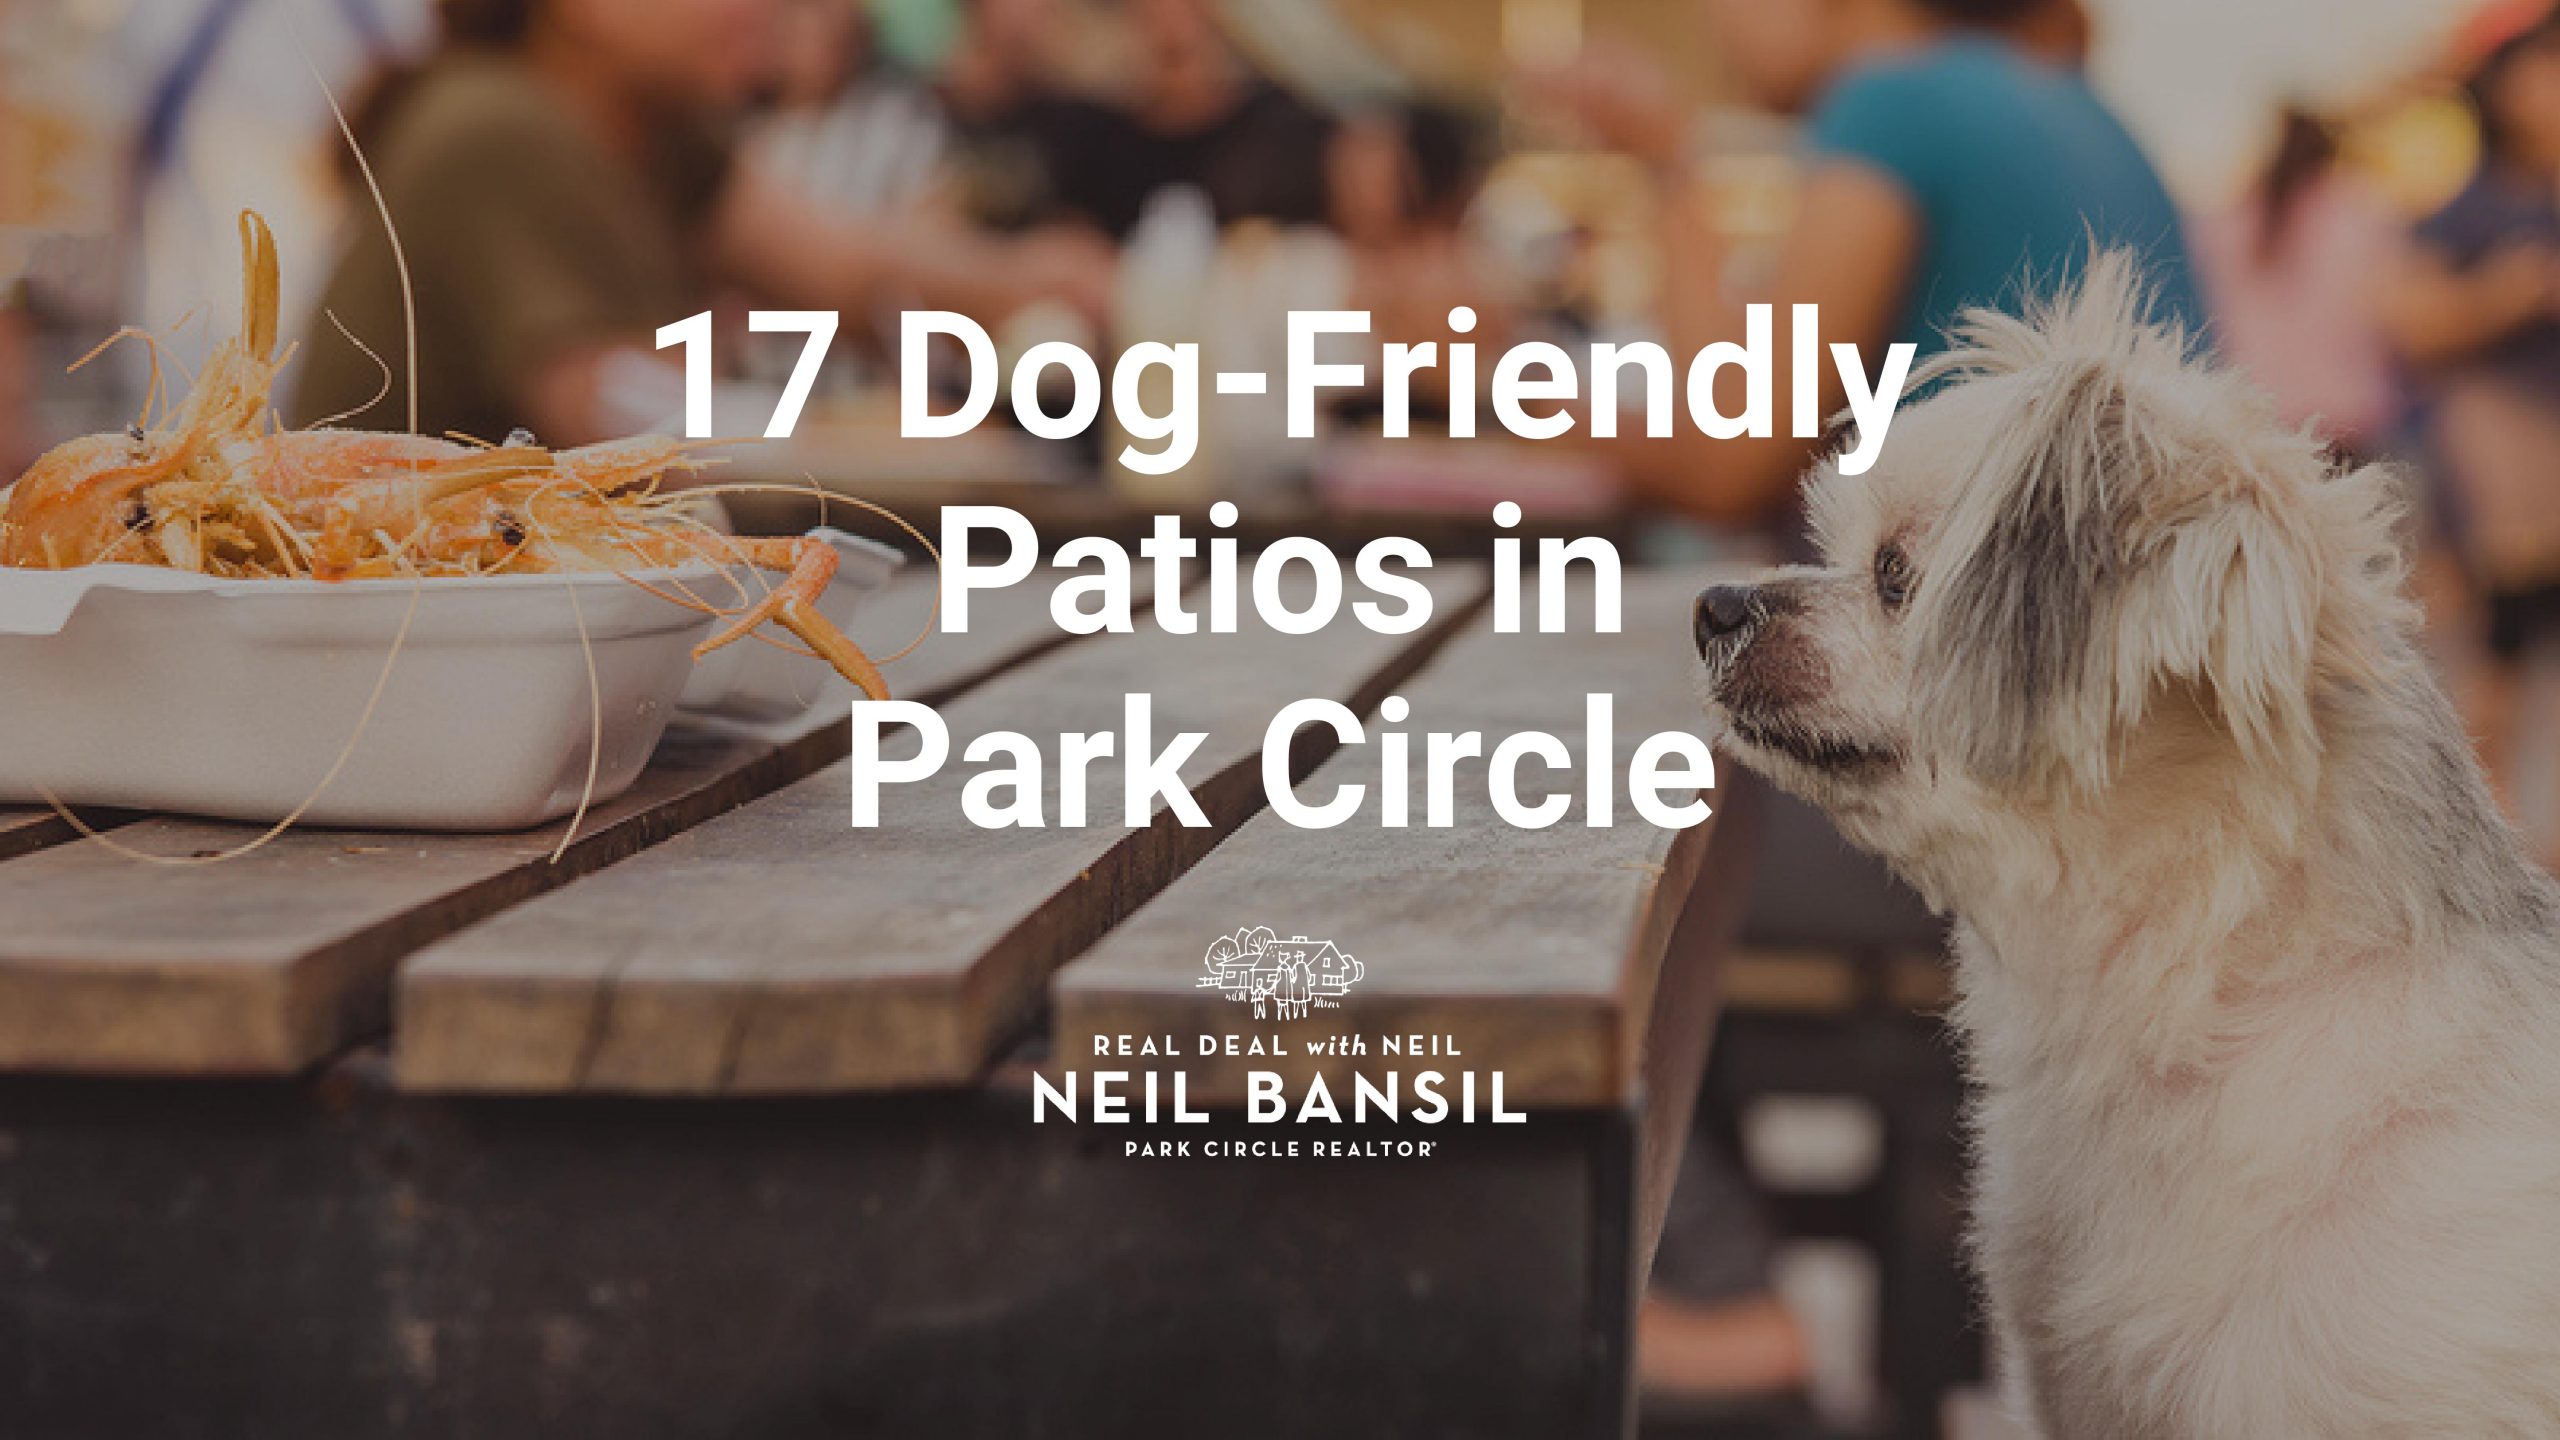 17 Dog-Friendly Patios in Park Circle - Real Deal with Neil